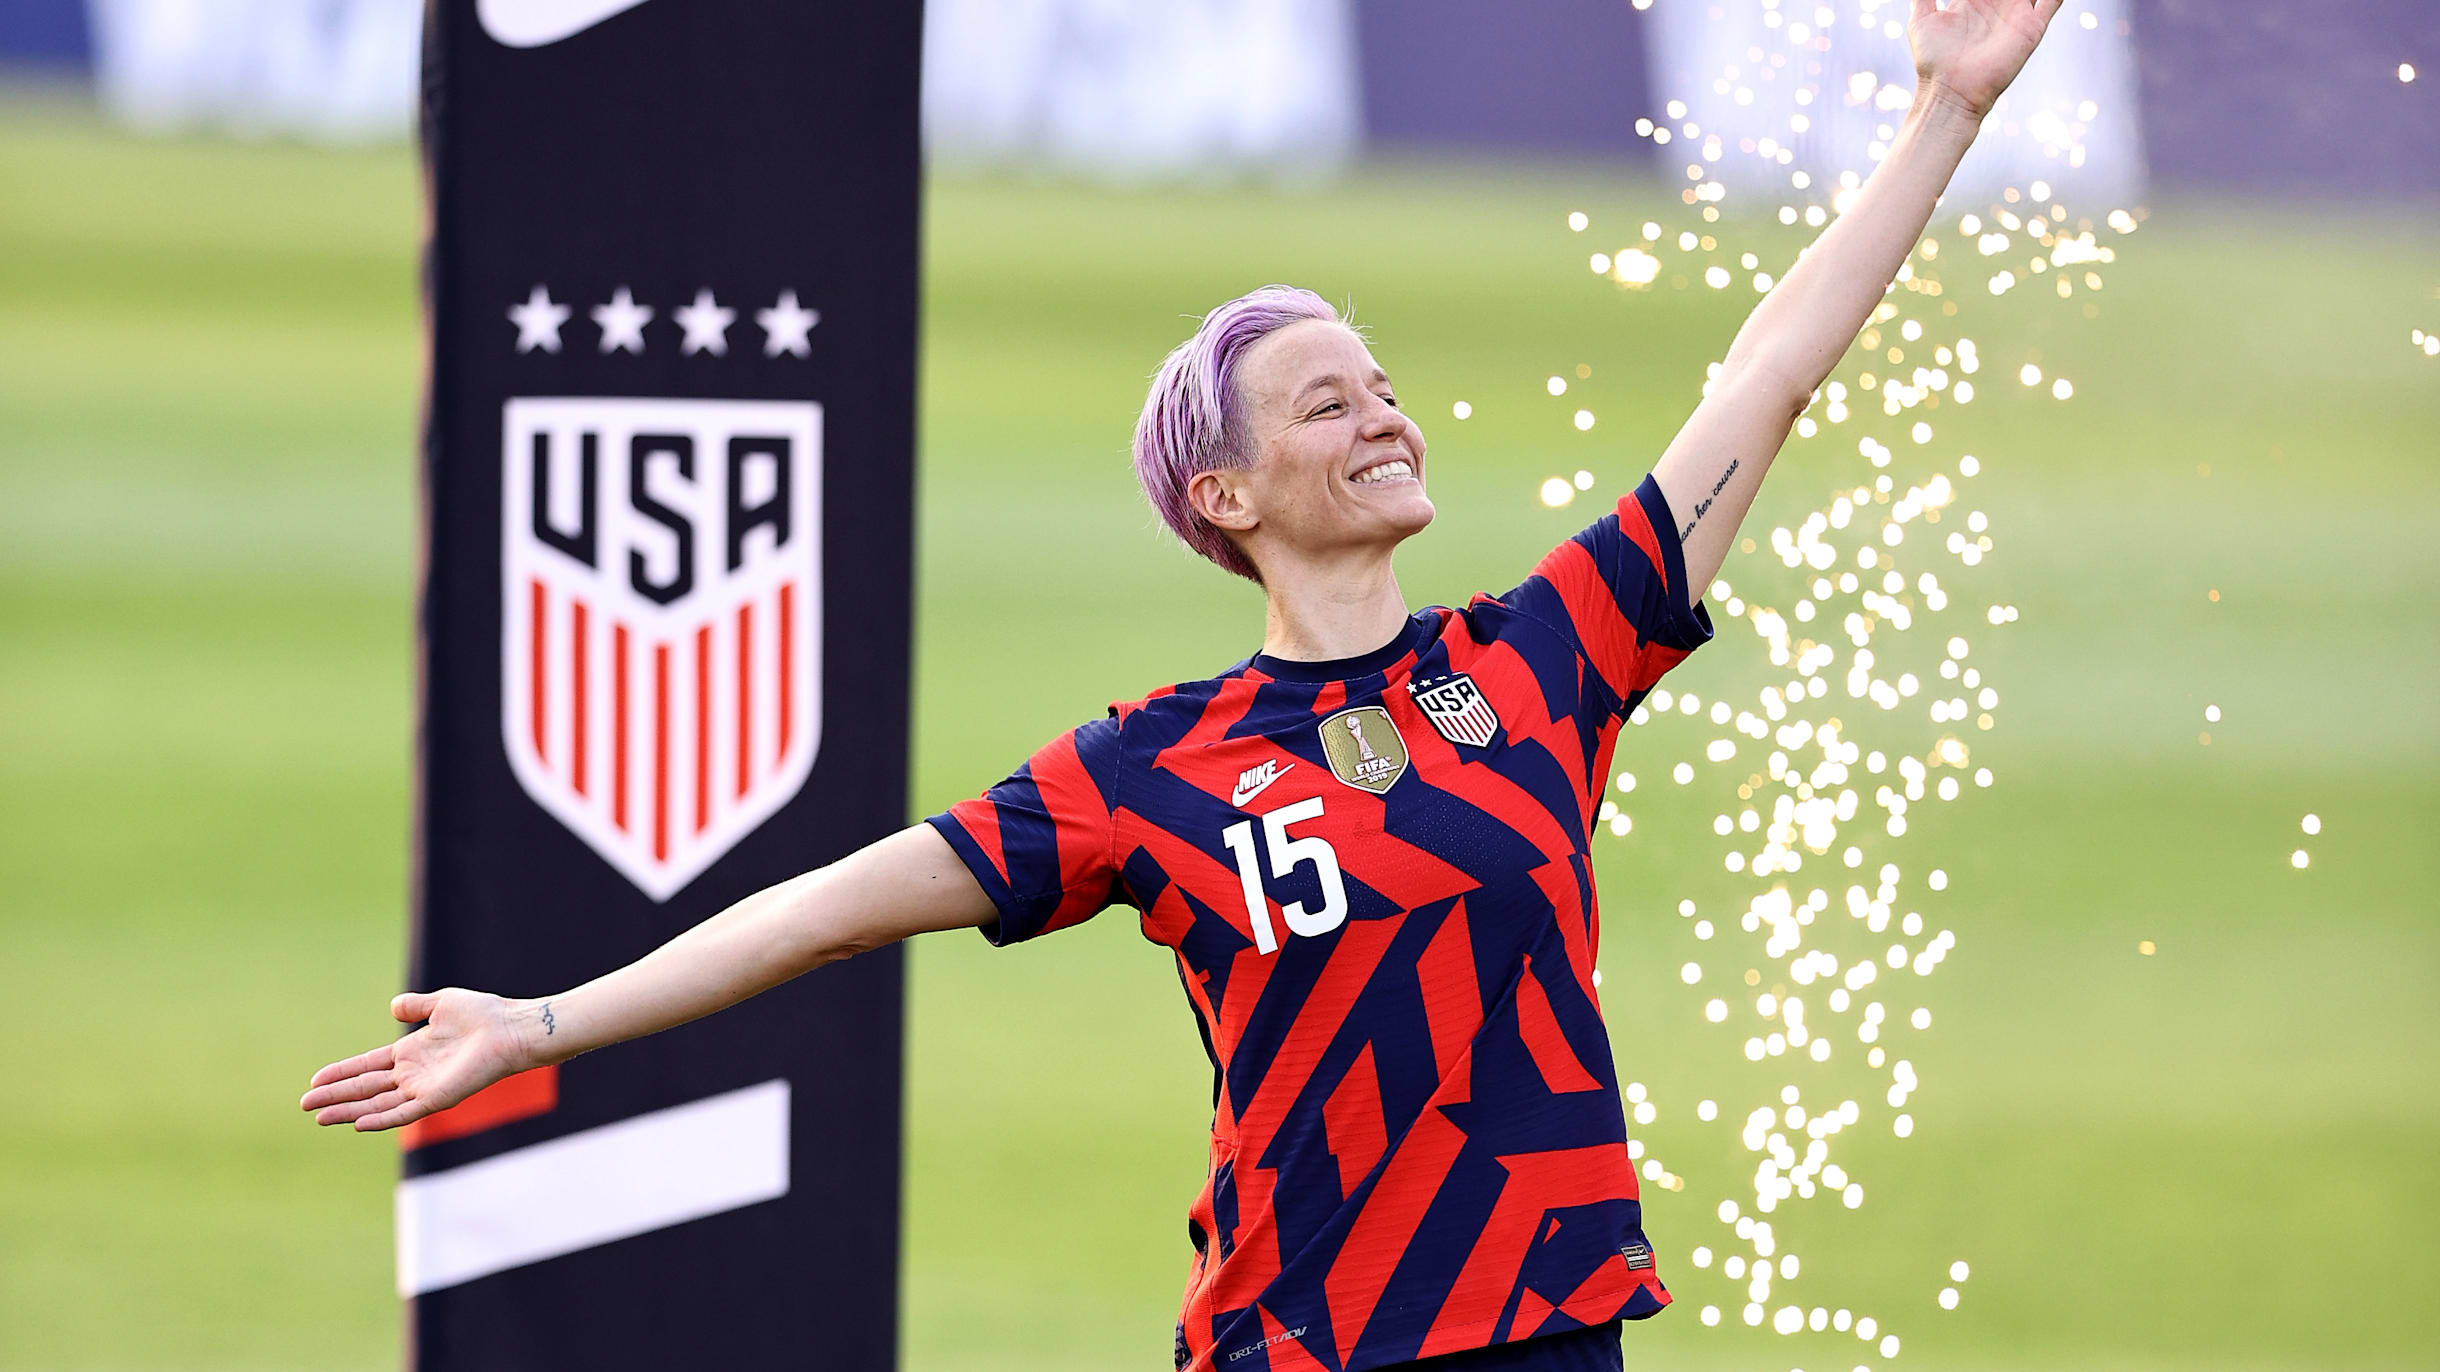 Megan Rapinoe honored by team OL Reign in front of record NWSL